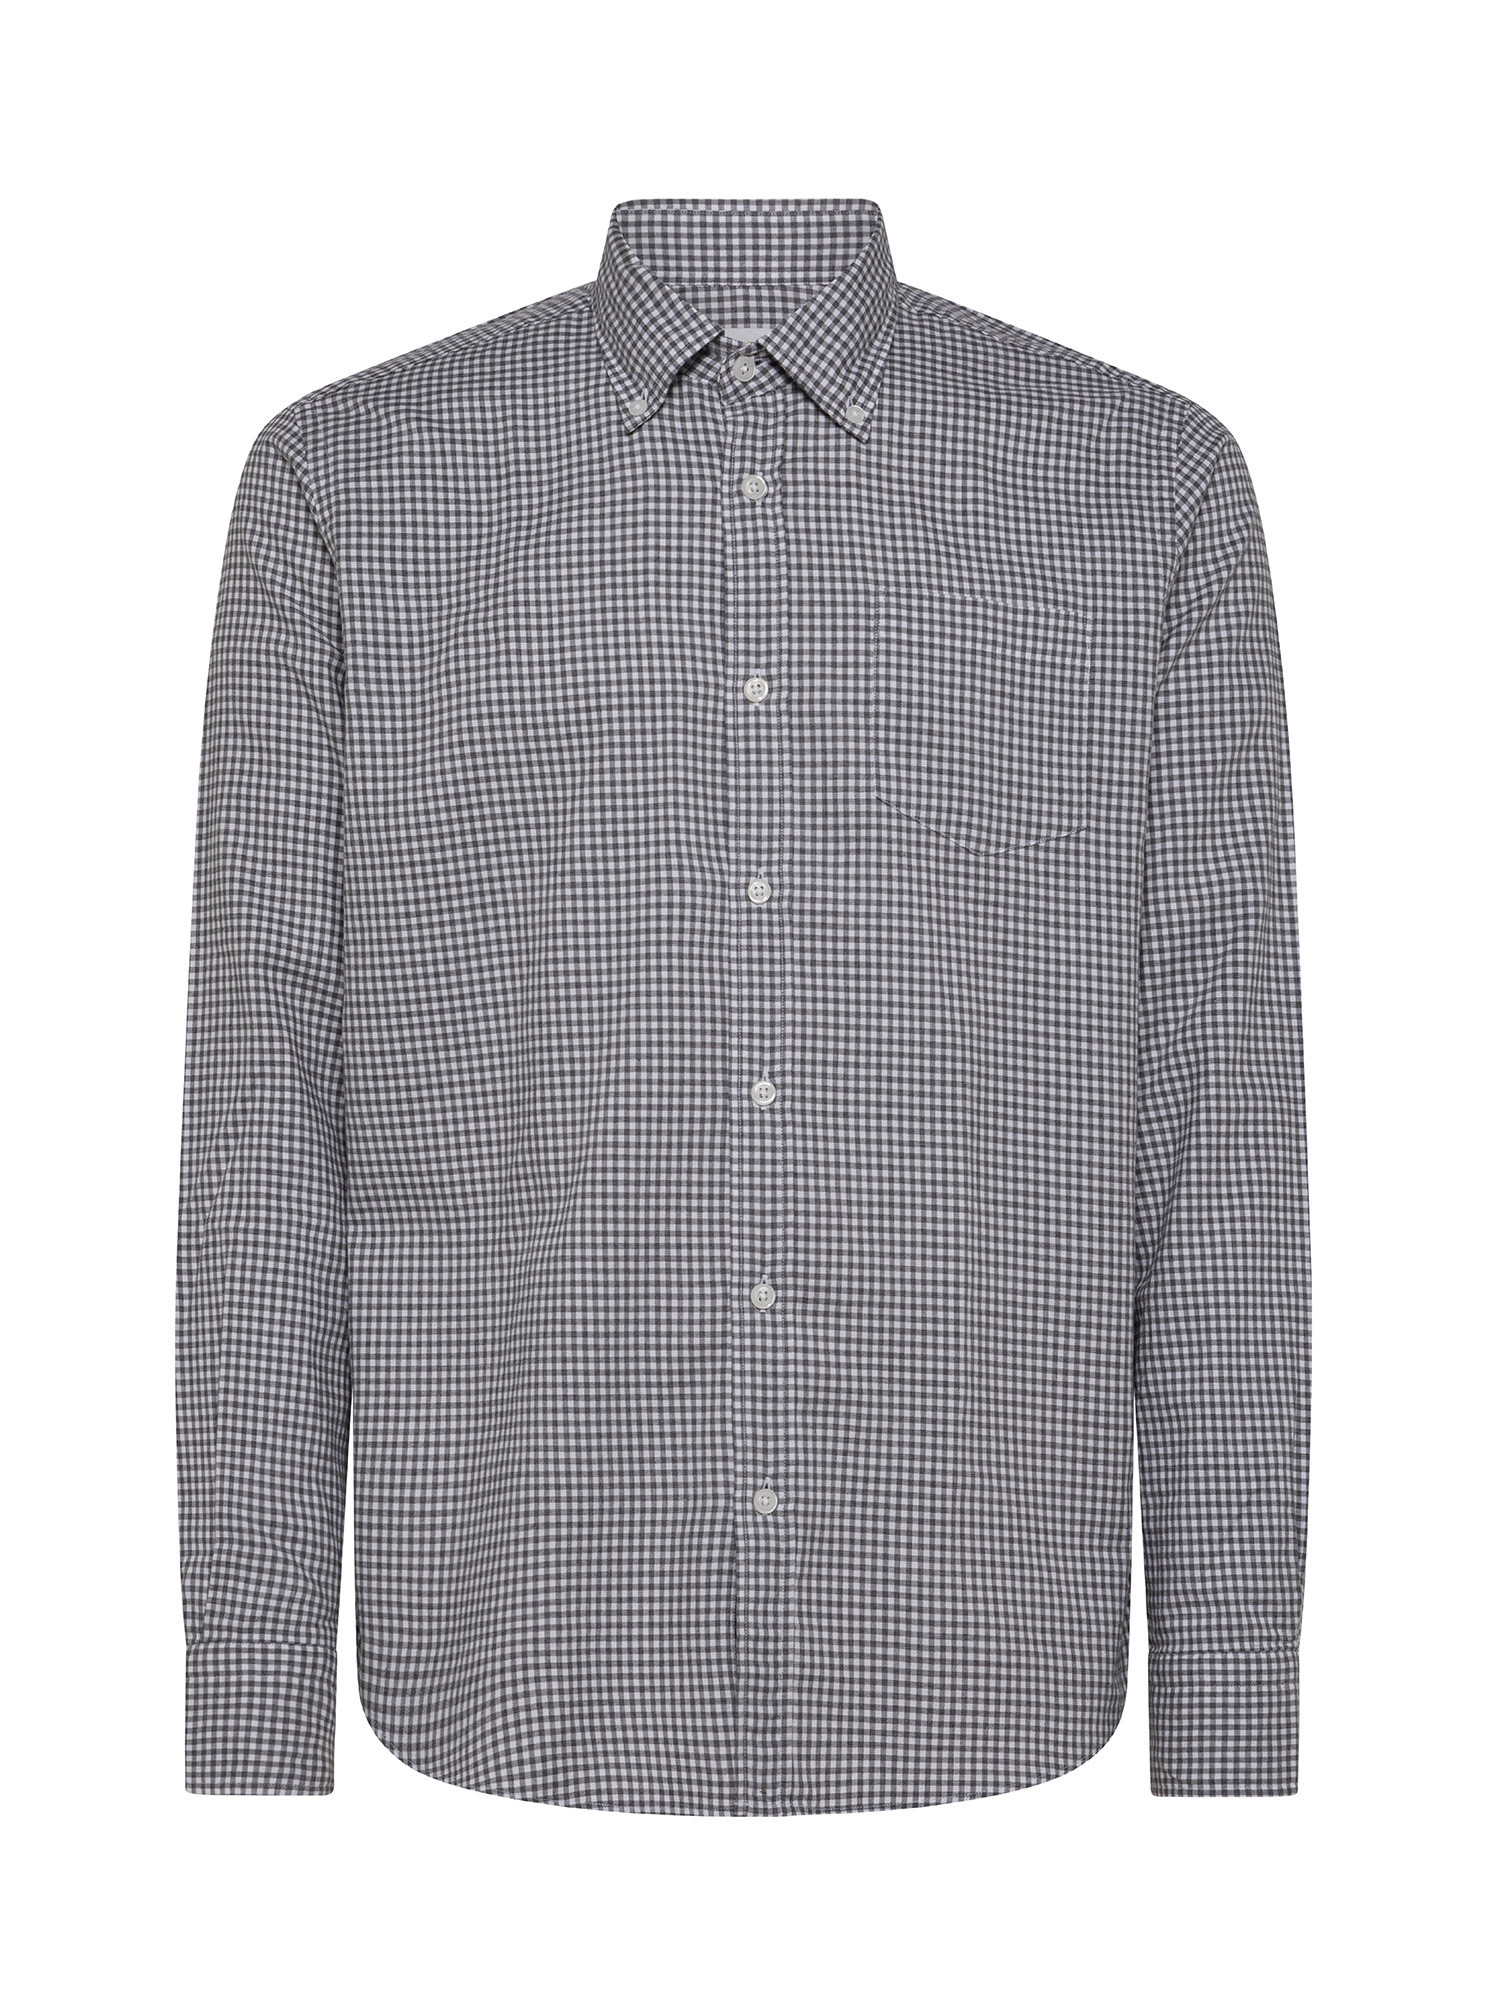 Tailor fit shirt in soft organic cotton flannel, Grey, large image number 1